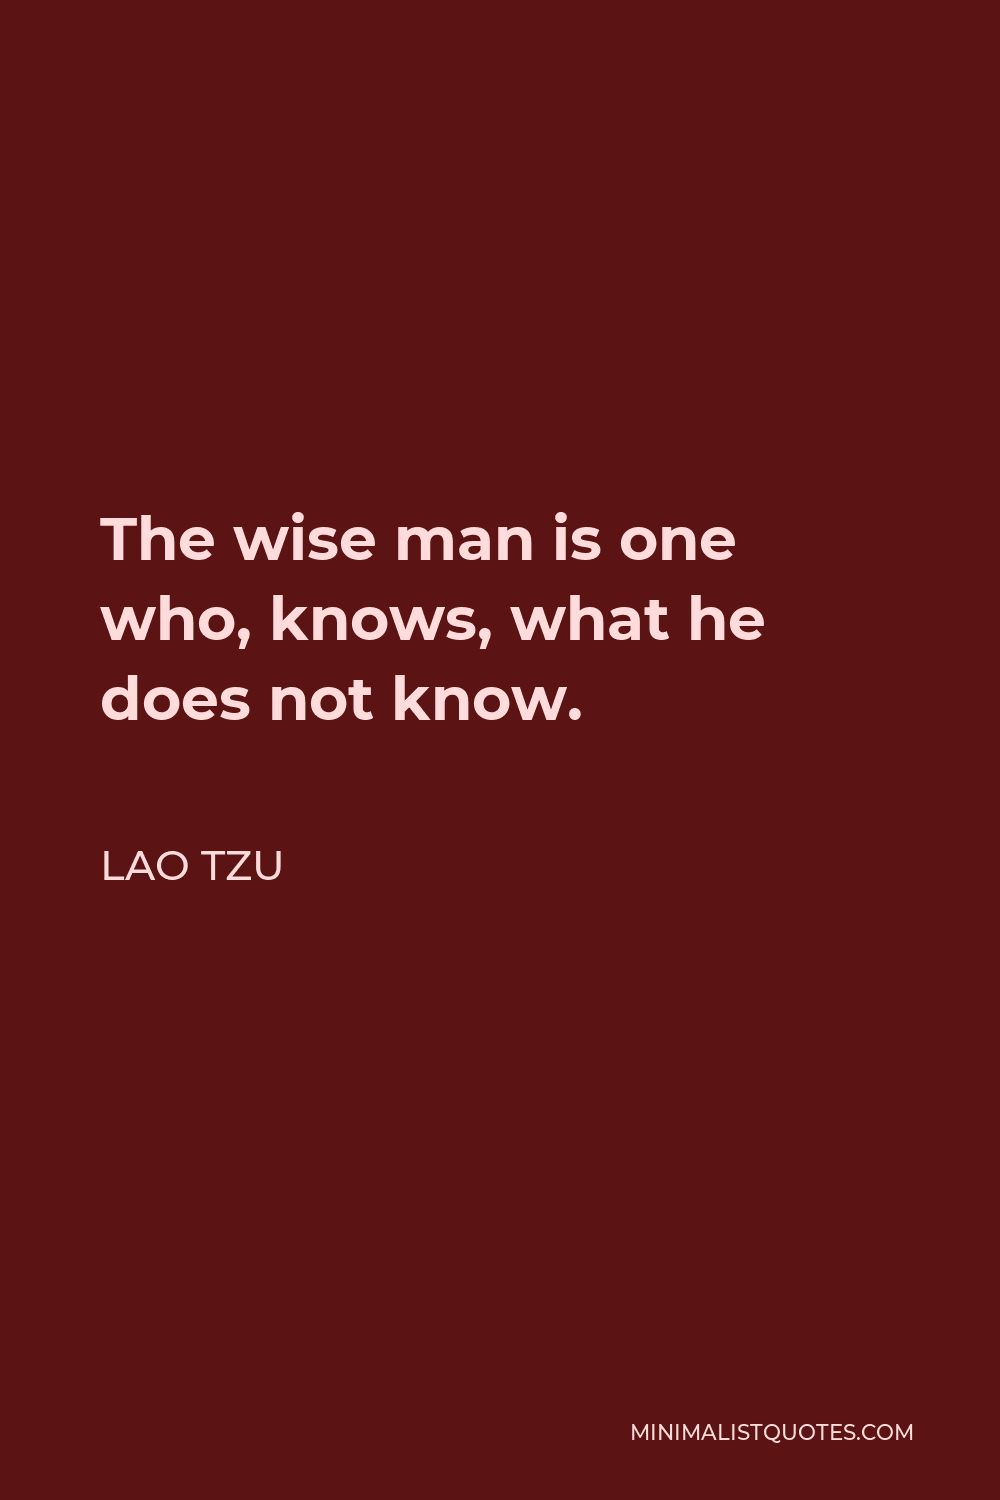 Lao Tzu Quote - The wise man is one who, knows, what he does not know.